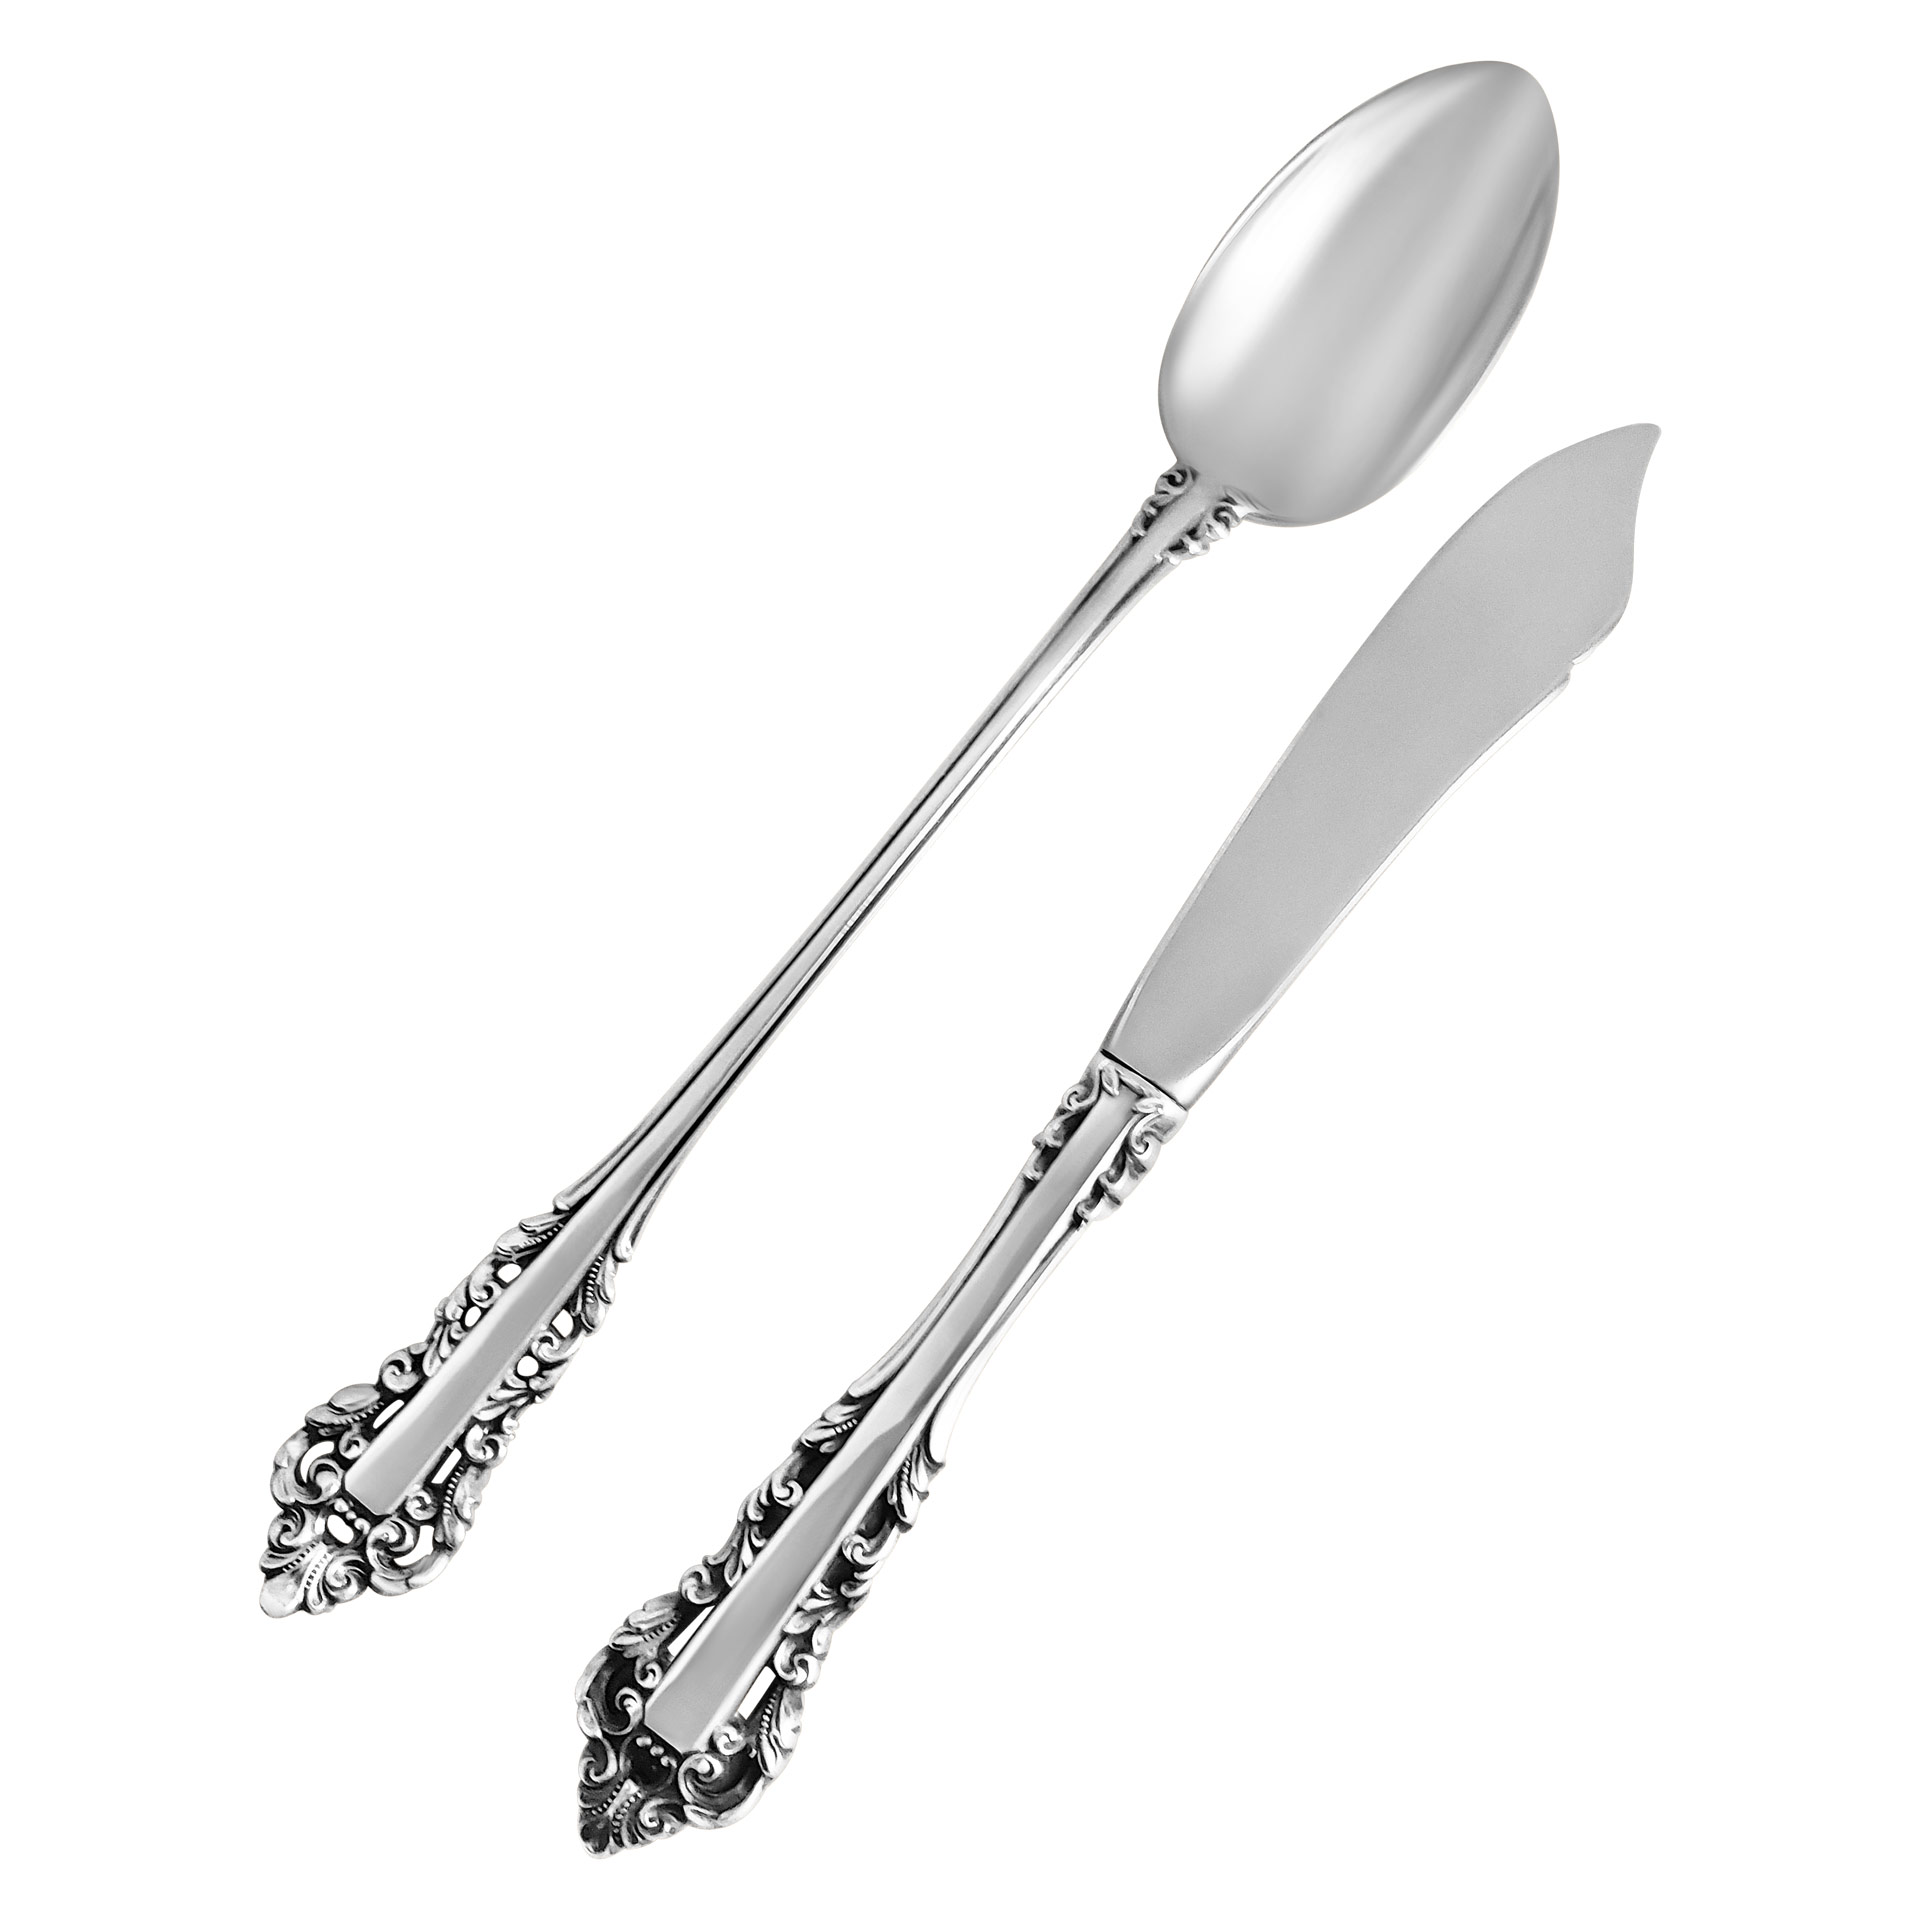 "MEDICI" Sterling Silver Flatware Set by Gorham, patented in 1971- 4 place setting for 12 (some are 16) with 2 seving pieces. Over 2000 in sterling silver. image 2